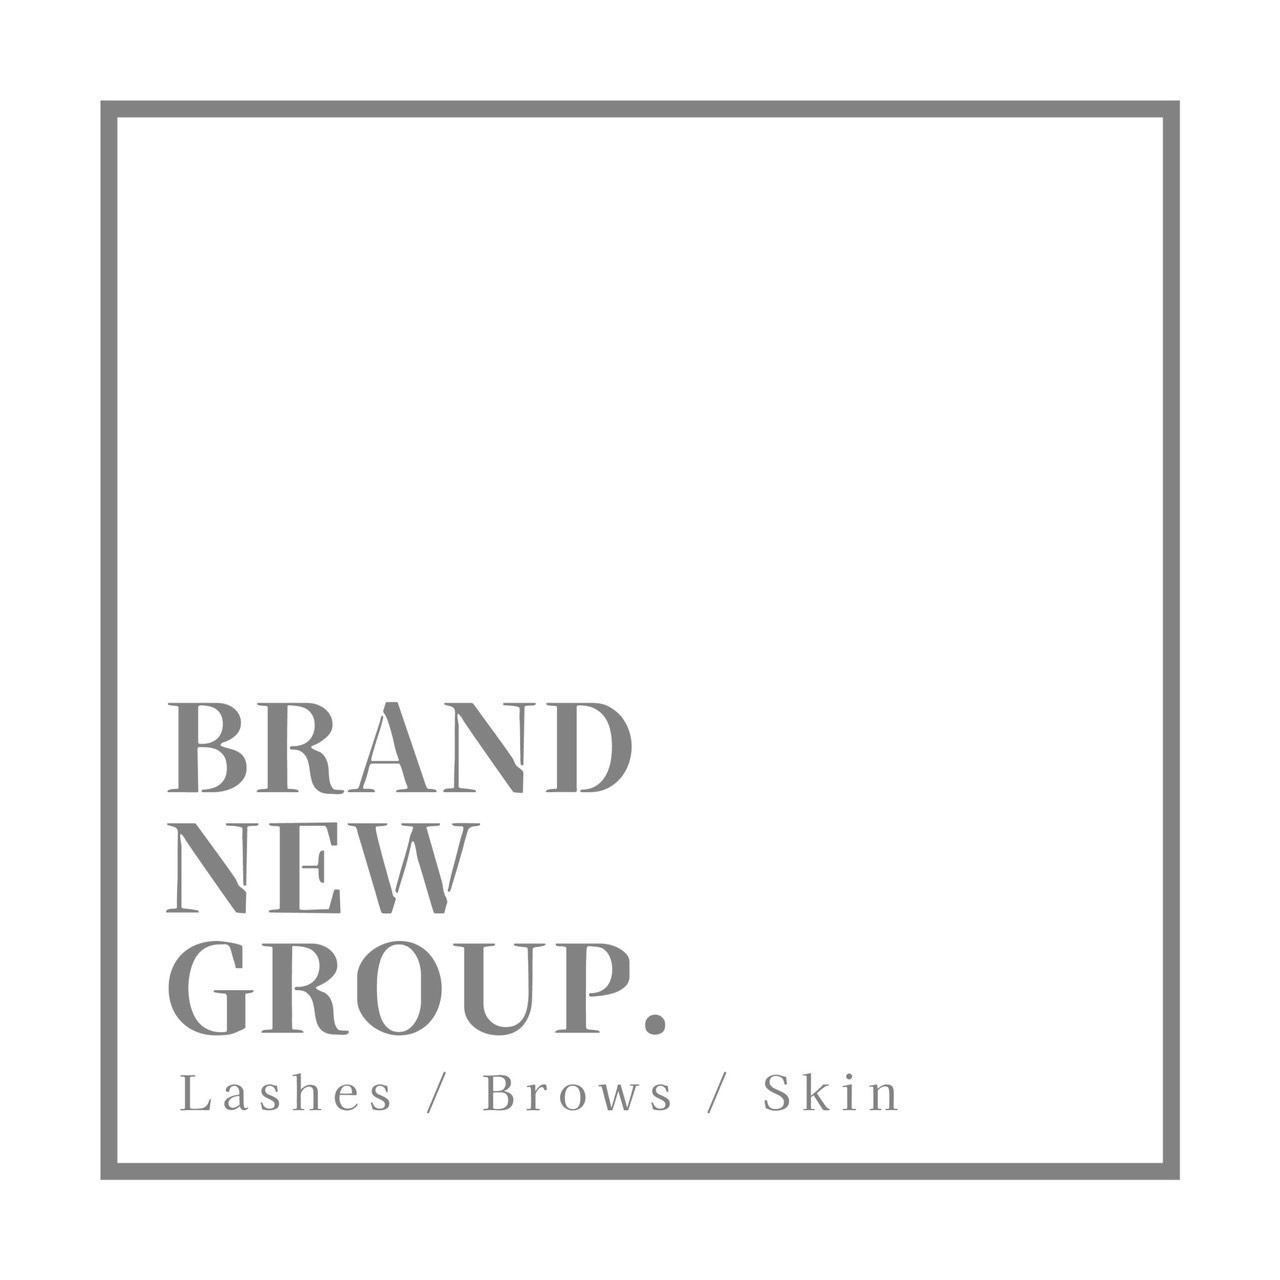 BRAND NEW GROUP.